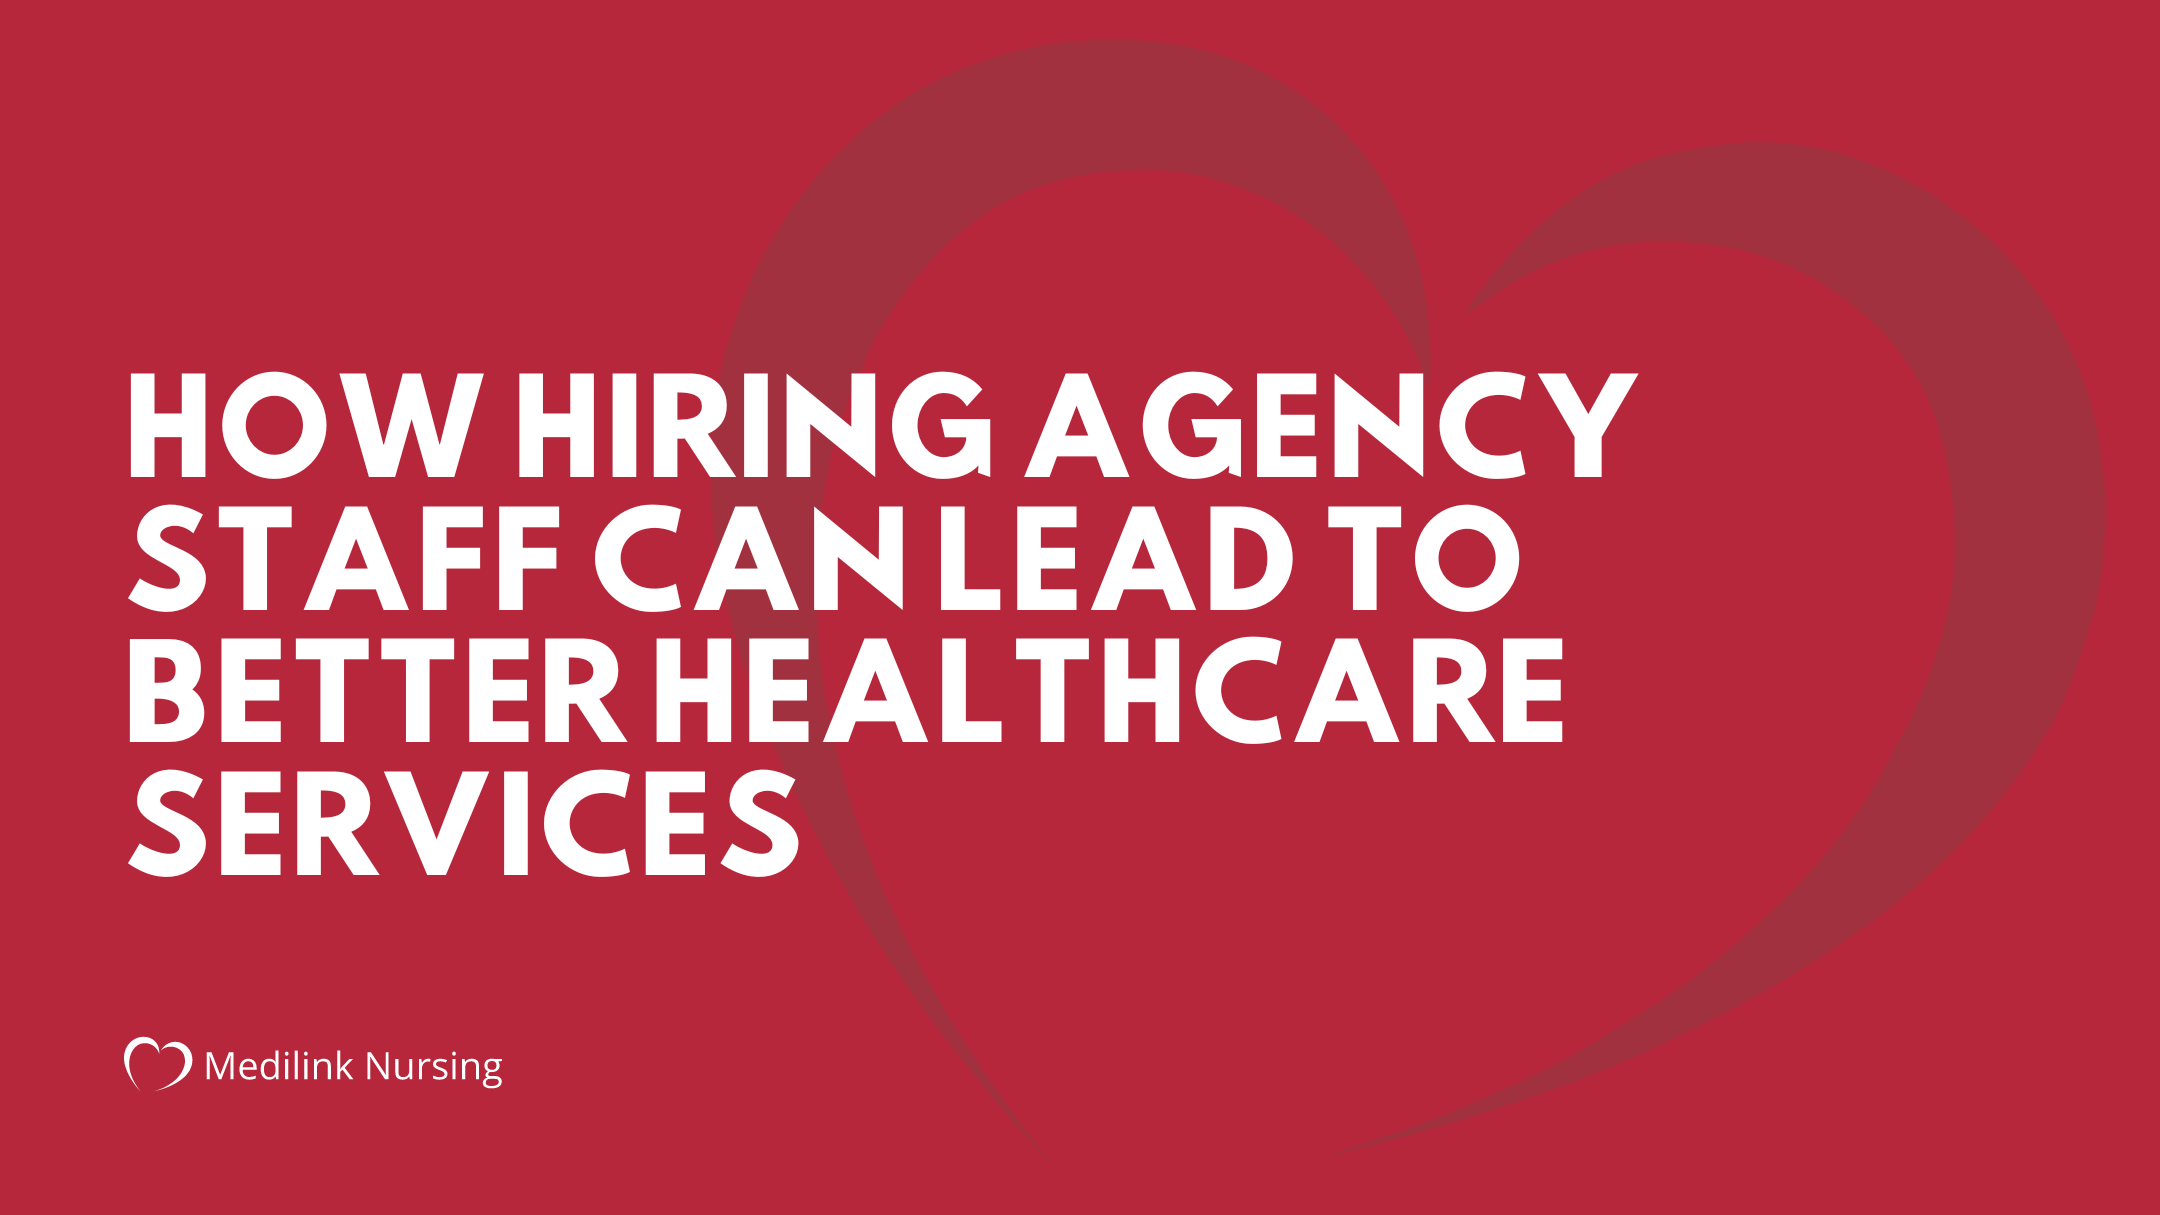 How Hiring Agency Staff Can Lead To Better Healthcare Services